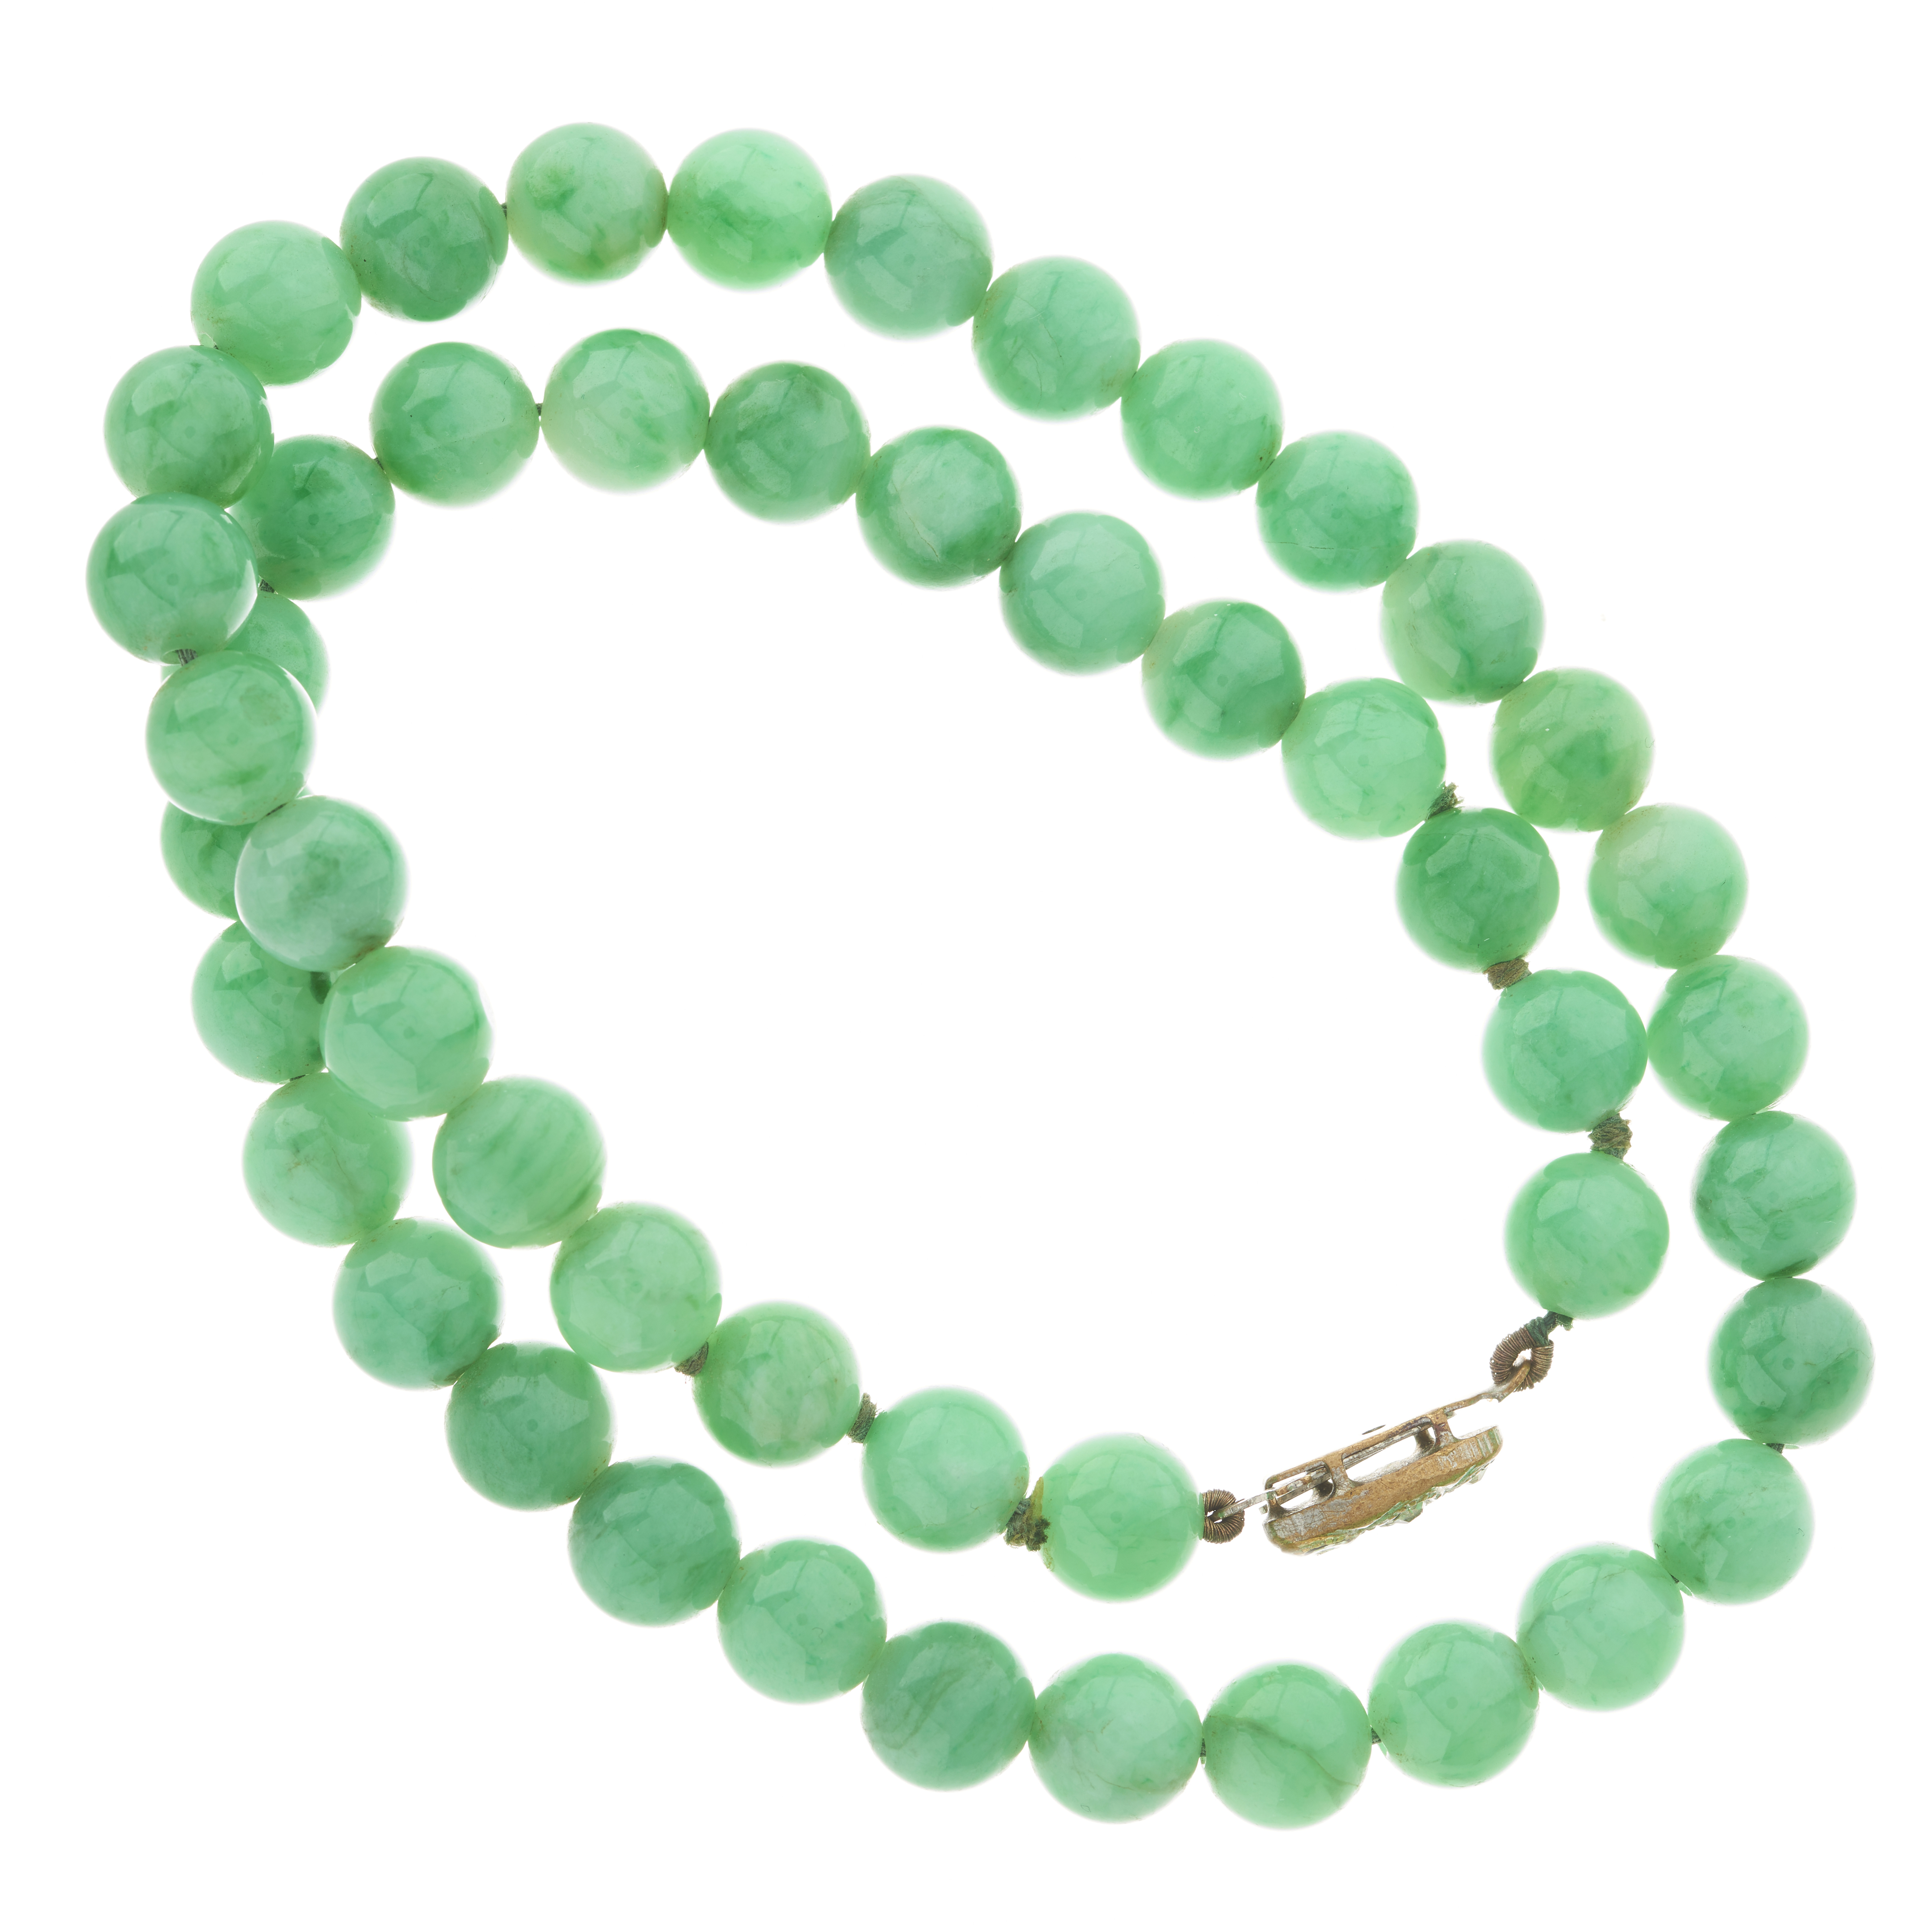 A natural jadeite jade bead necklace, with GIA report - Image 2 of 3